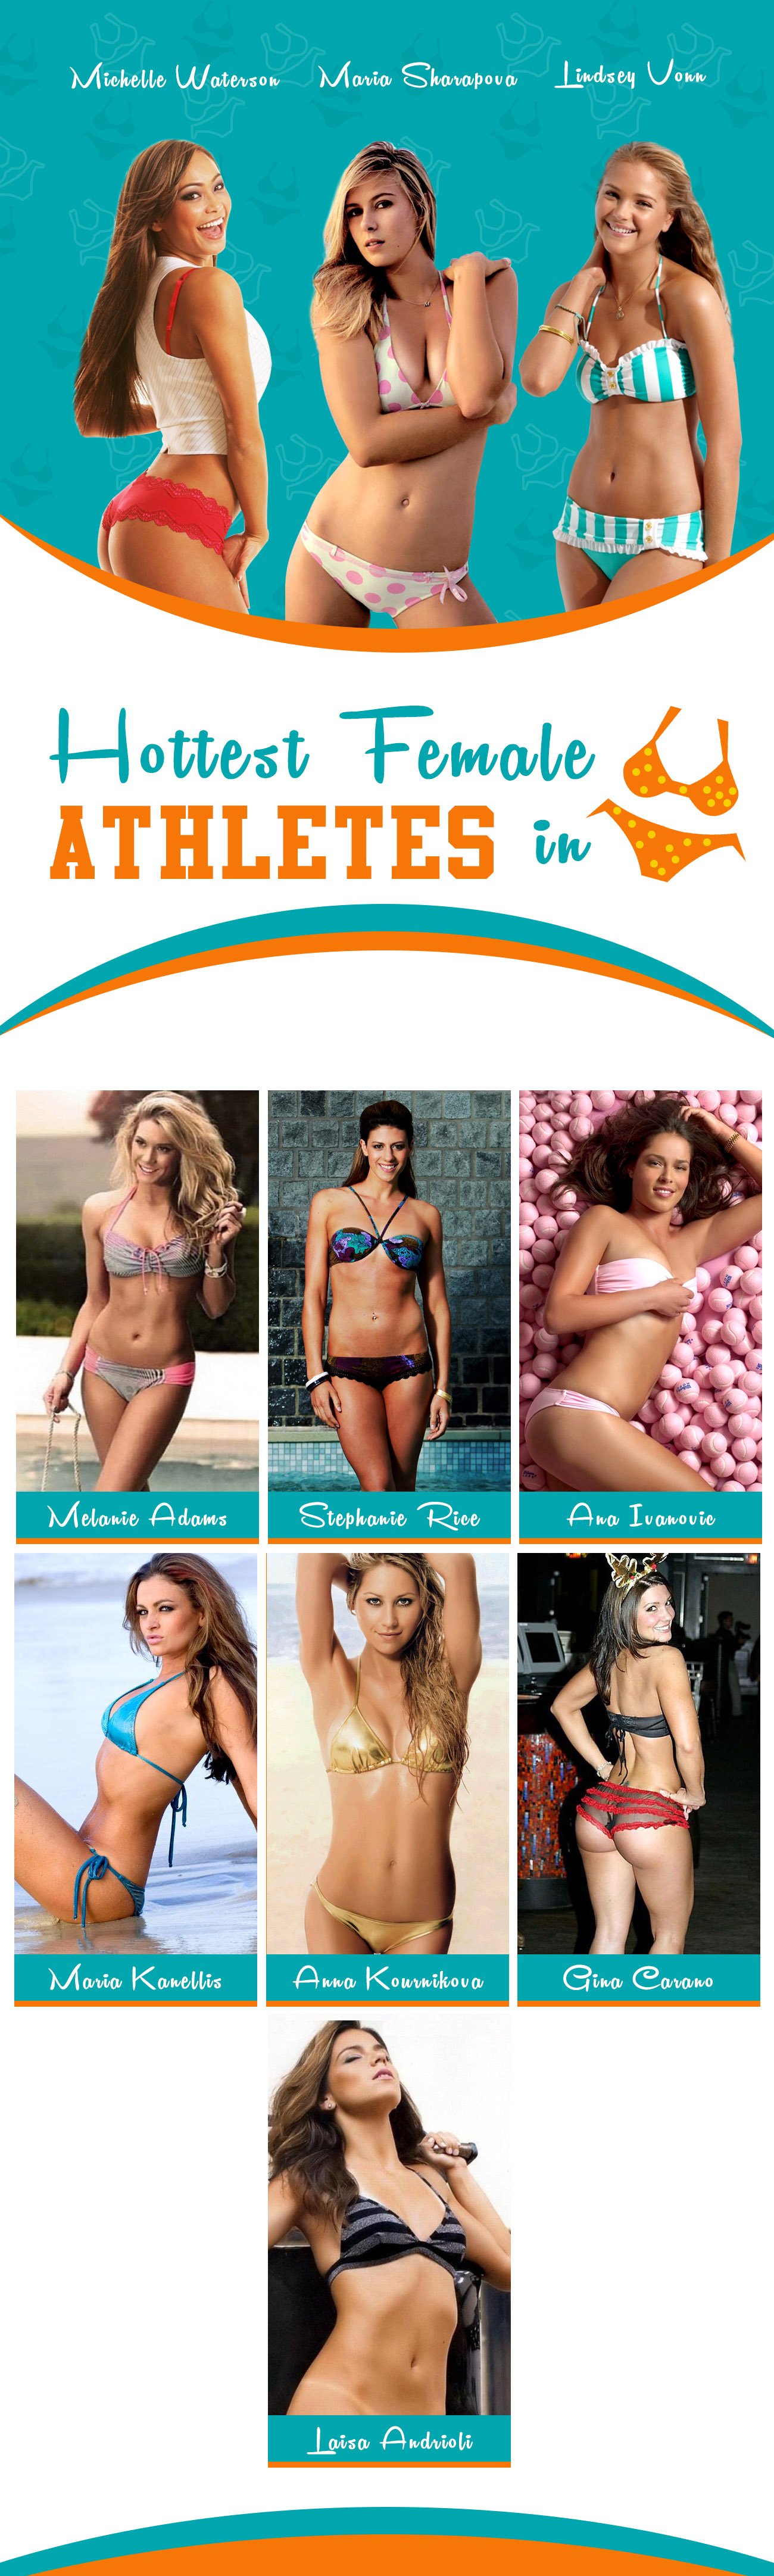 Top 10 Hottest Female Athletes in Bikinis Infographic